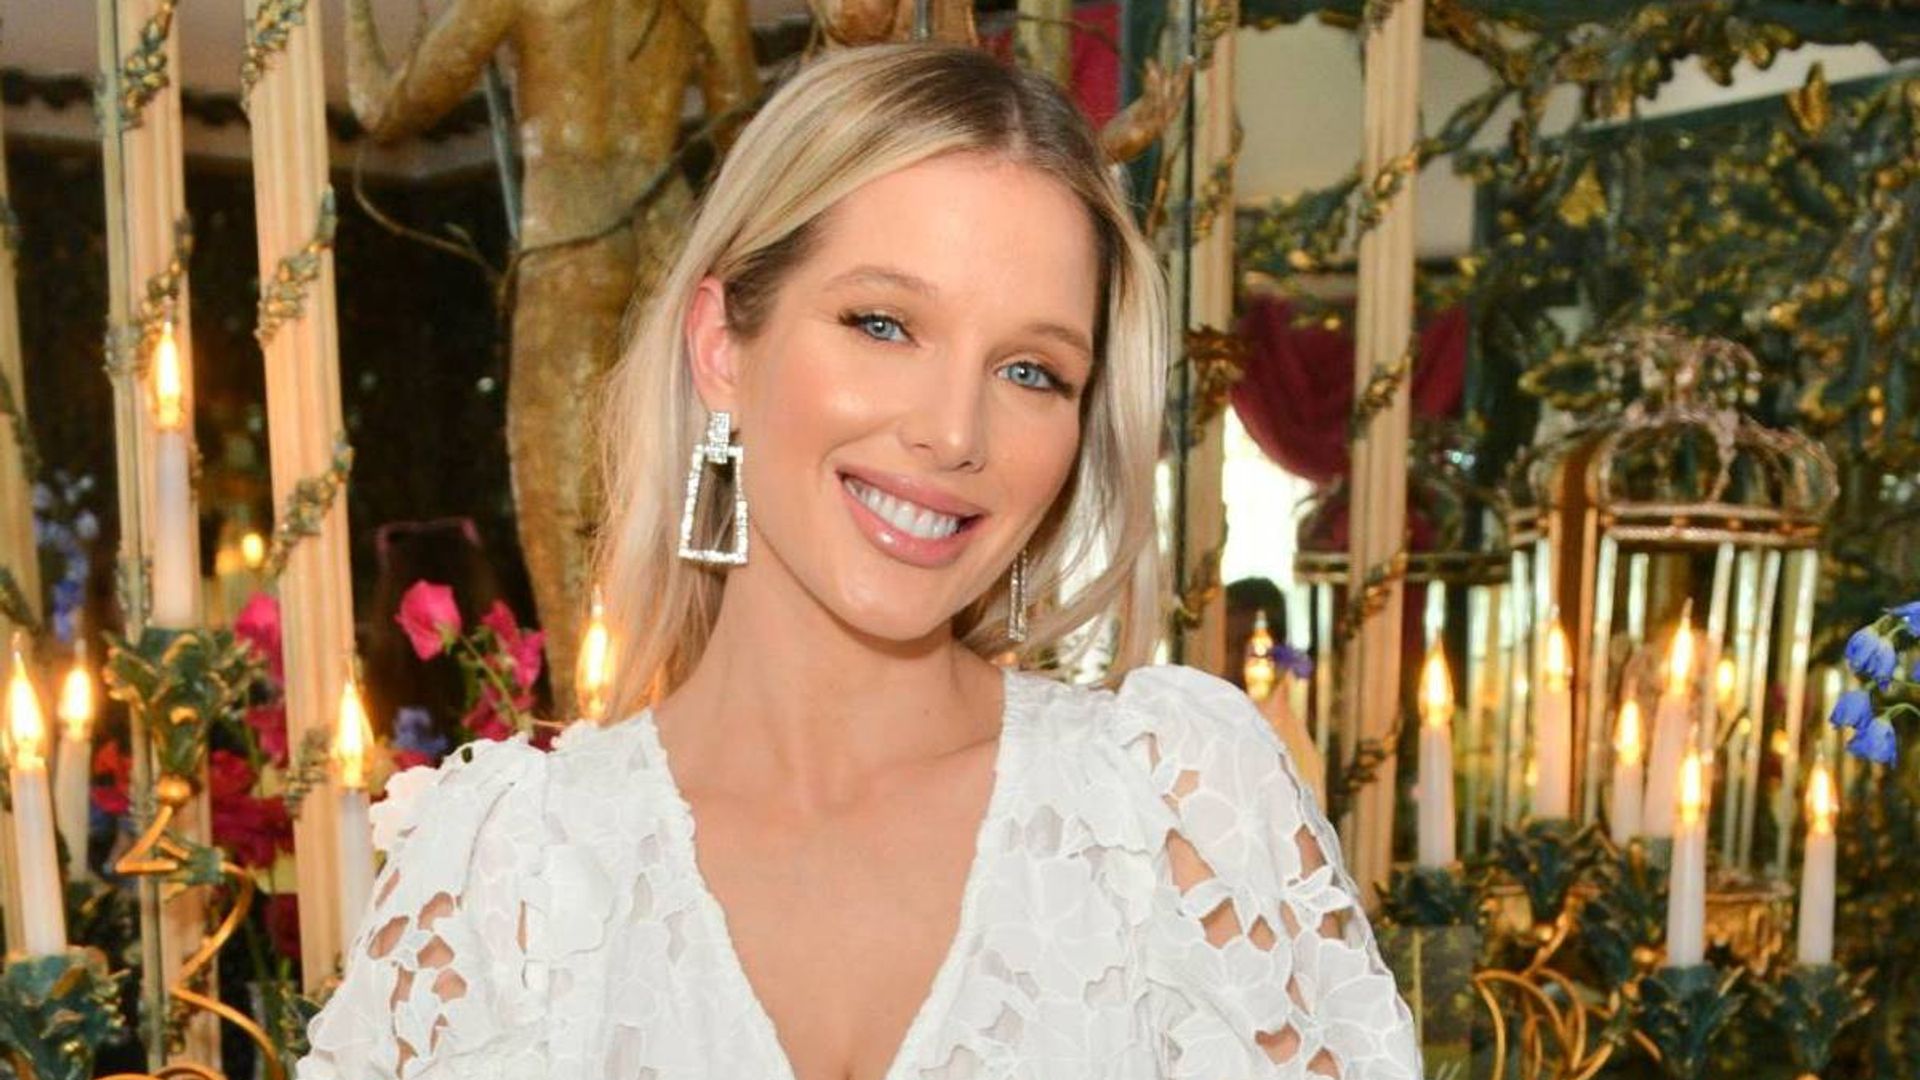 Helen Flanagan wearing a white lace dress and smiling at the camera